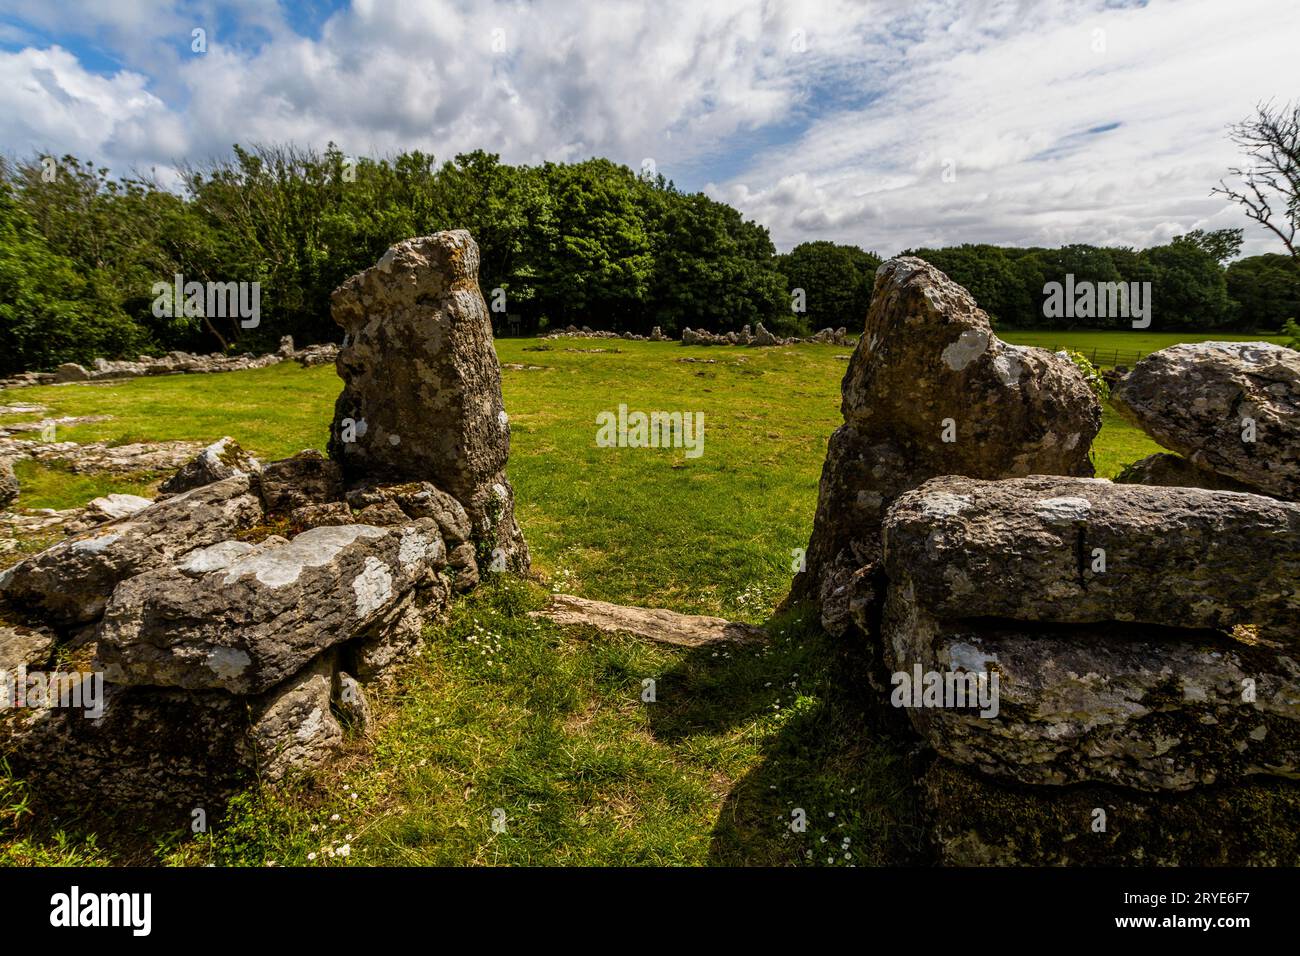 Stone entrance in Remains of Din Lligwy, or Din Llugwy ancient village, Near Moelfre, Anglesey, North Wales, UK, landscape, wide, angle, wideangle. Stock Photo